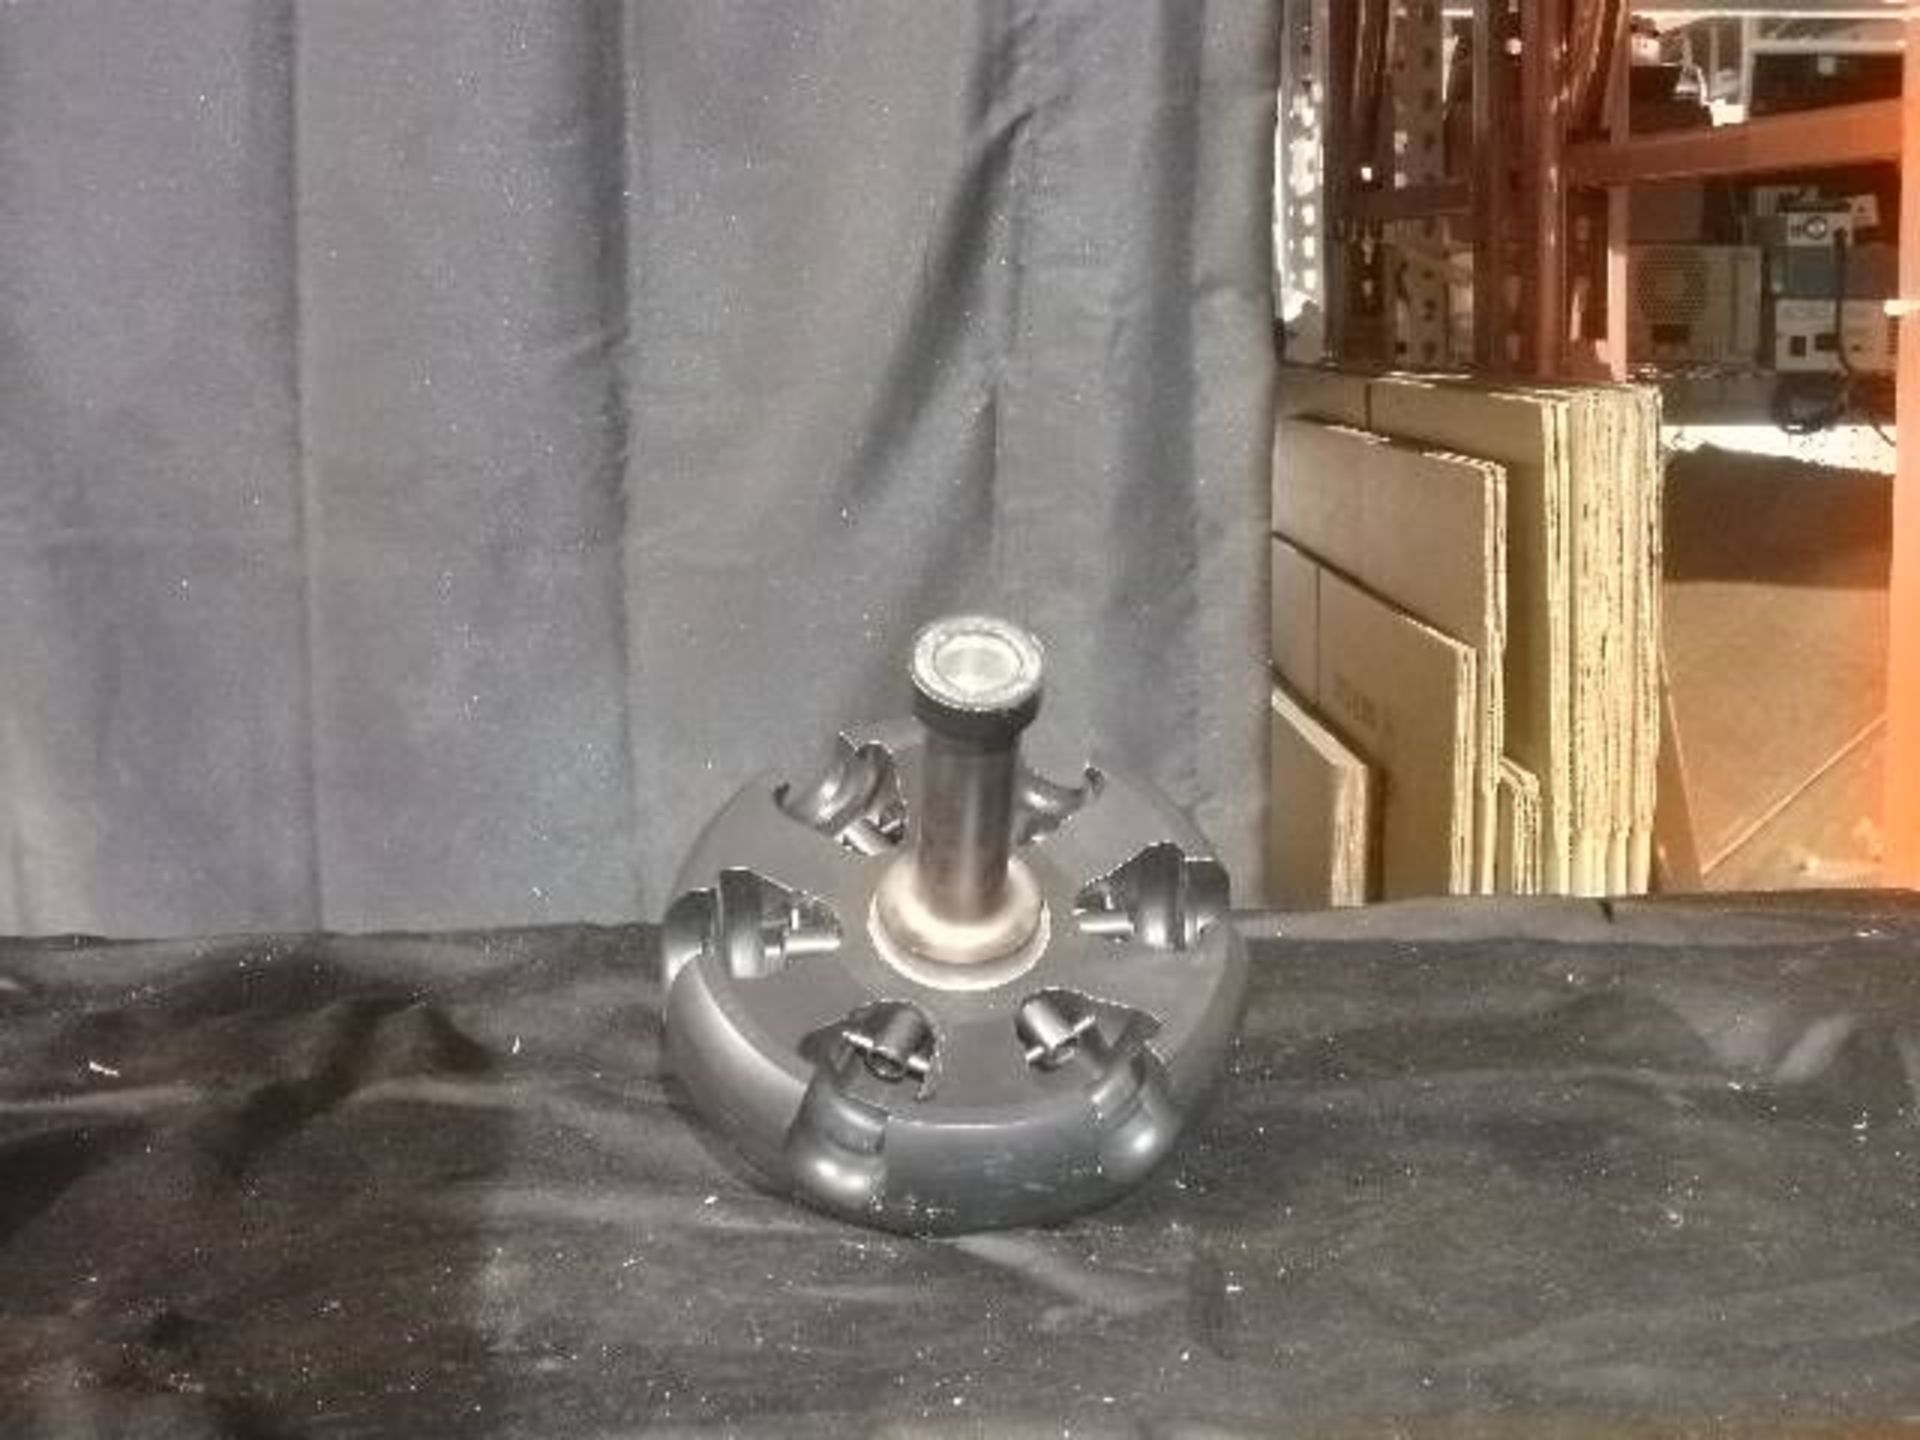 BECKMAN Swing Bucket 40,000 RPM Rotor Serial # 385 Class G Only, Qty 1, 321463261259 - Image 3 of 4